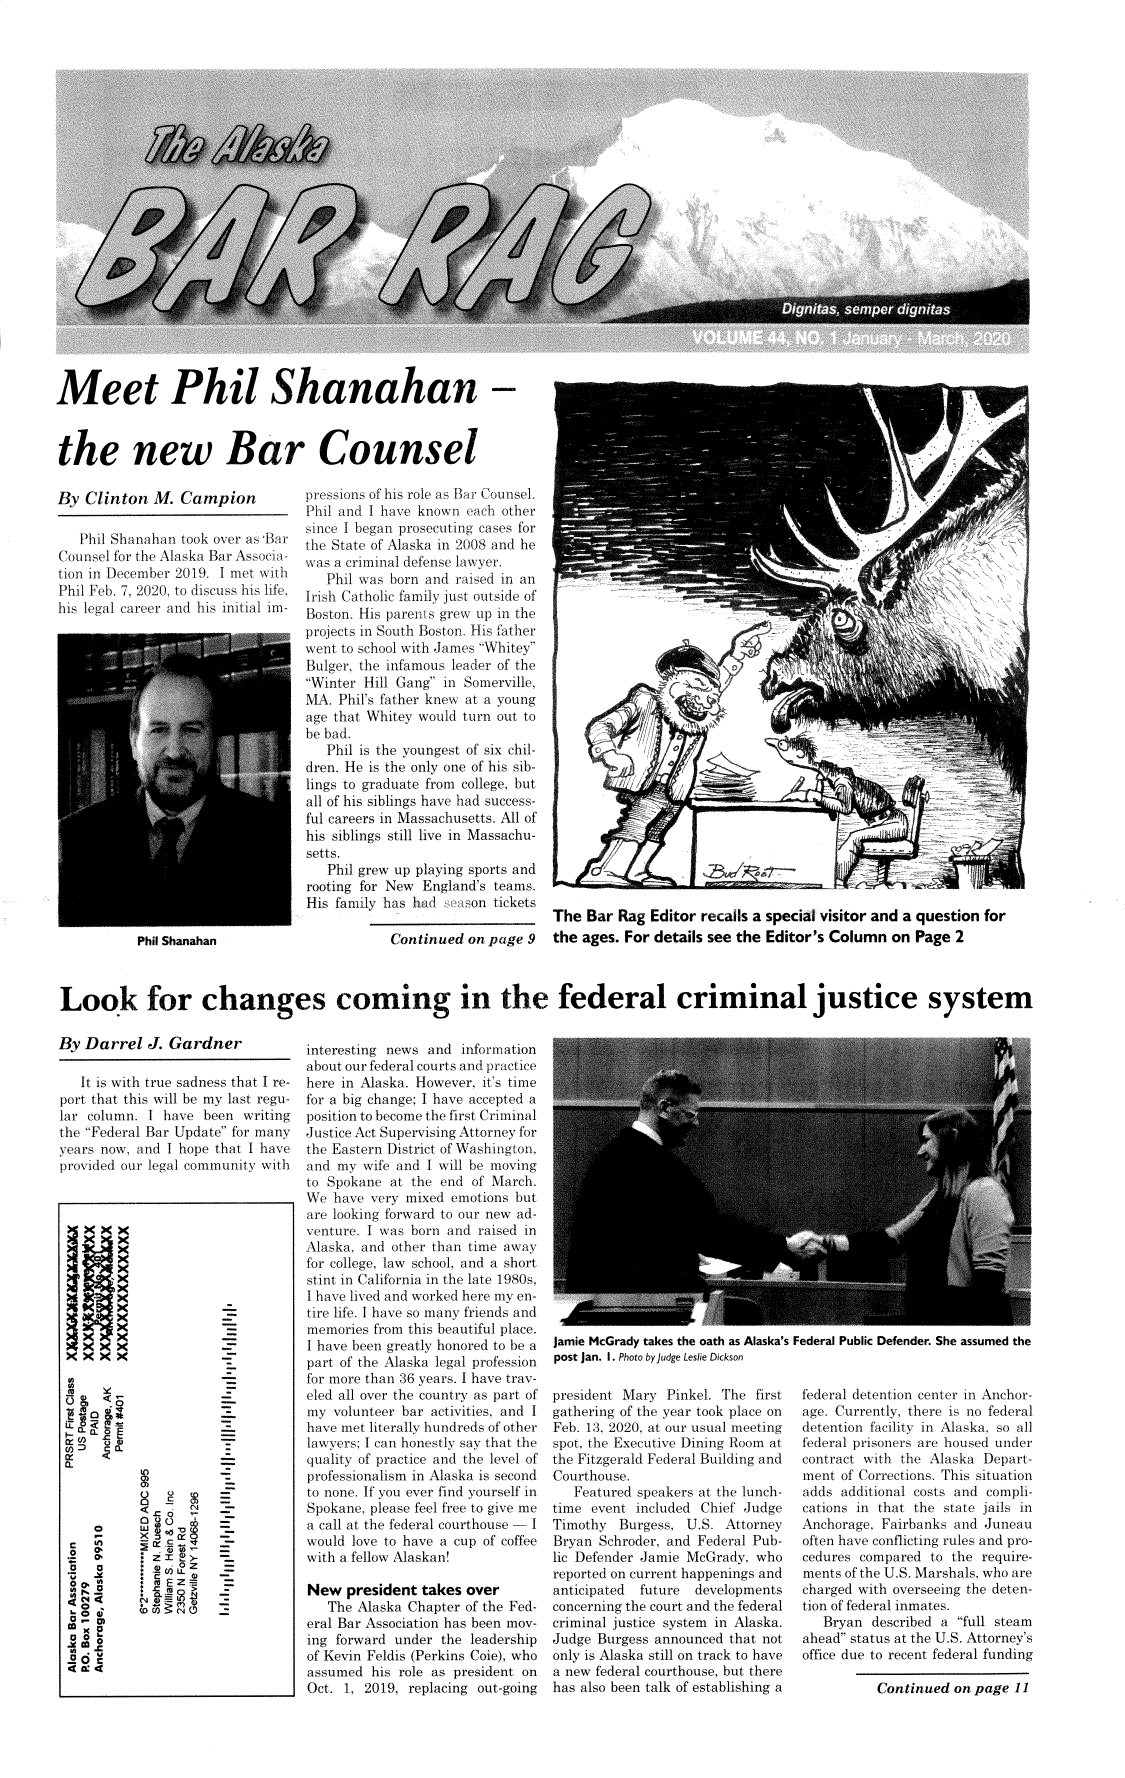 handle is hein.barjournals/askabar0044 and id is 1 raw text is: 
























Meet Phil Shanahan -



the new Bar Counsel


By  Clinton   M. Campion

   Phil Shanahan  took over as'Bar
Counsel for the Alaska Bar Associa-
tion in December 2019  I met with
Phil Feb. 7, 2020, to discuss his life,
his legal career and his initial im-


Phil Shanahan


pressions of his role as Bar Counsel.
Phil and I have known  each other
since I began prosecuting cases for
the State of Alaska in 2008 and he
was a criminal defense lawyer.
   Phil was born and raised in an
Irish Catholic family just outside of
Boston. His parents grew up in the
projects in South Boston. His father
went to school with James Whitey
Bulger, the infamous leader of the
Winter Hill Gang  in Somerville,
MA.  Phil's father knew at a young
age that Whitey would turn out to
be bad.
   Phil is the youngest of six chil-
dren. He is the only one of his sib-
lings to graduate from college, but
all of his siblings have had success-
ful careers in Massachusetts. All of
his siblings still live in Massachu-
setts.
   Phil grew up playing sports and
rooting for New  England's teams.
His family has ha      son tickets


Continued  on page 9


      f                3


The  Bar Rag  Editor recalls a special visitor and a question for
the ages. For details see the Editor's Column   on Page  2


Look for changes coming in the federal criminal justice system


By  Darrel   J. Gardner


   It is with true sadness that I re-
port that this will be my last regu-
lar column.  I have been  writing
the Federal Bar Update for many
years now, and I hope that I have
provided our legal community with


interesting news and  information
about our federal courts and practice
here in Alaska. However, it's time
for a big change; I have accepted a
position to become the first Criminal
Justice Act Supervising Attorney for
the Eastern District of Washington,
and my  wife and I will be moving
to Spokane  at the end of March.
We  have very mixed emotions  but
are looking forward to our new ad-
venture. I was born and raised in
Alaska, and other than time away
for college, law school, and a short
stint in California in the late 1980s,
I have lived and worked here my en-
tire life. I have so many friends and
memories  from this beautiful place.
I have been greatly honored to be a
part of the Alaska legal profession
for more than 36 years. I have trav-
eled all over the country as part of
my  volunteer bar activities, and I
have met literally hundreds of other
lawyers; I can honestly say that the
quality of practice and the level of
professionalism in Alaska is second
to none. If you ever find yourself in
Spokane, please feel free to give me
a call at the federal courthouse - I
would love to have a cup of coffee
with a fellow Alaskan!

New   president takes  over
   The Alaska Chapter  of the Fed-
eral Bar Association has been mov-
ing forward  under the leadership
of Kevin Feldis (Perkins Coe), who
assumed  his role as president on
Oct. 1, 2019, replacing out-going


Jamie McGrady takes the oath as Alaska's Federal Public Defender. She assumed the


post Jan. I. Photo byJudge Leslie Dickson

president Mary  Pinkel. The  first
gathering of the year took place on
Feb. 13, 2020, at our usual meeting
spot, the Executive Dining Room at
the Fitzgerald Federal Building and
Courthouse.
   Featured speakers at the lunch-
time  event included Chief Judge
Timothy  Burgess,  U.S. Attorney
Bryan  Schroder, and Federal Pub-
lic Defender Jamie McGrady,  who
reported on current happenings and
anticipated future  developments
concerning the court and the federal
criminal justice system in Alaska.
Judge Burgess  announced that not
only is Alaska still on track to have
a new federal courthouse, but there
has also been talk of establishing a


federal detention center in Anchor-
age. Currently, there is no federal
detention facility in Alaska, so all
federal prisoners are housed under
contract with the Alaska  Depart-
ment  of Corrections. This situation
adds  additional costs and compli-
cations in that the state jails in
Anchorage, Fairbanks and  Juneau
often have conflicting rules and pro-
cedures compared  to the require-
ments of the U.S. Marshals, who are
charged with overseeing the deten-
tion of federal inmates.
   Bryan  described a full steam
ahead status at the U.S. Attorney's
office due to recent federal funding

           Continued  on page 11


       x


   l*   x
   x  x
   x   x






a.





  o  '    f   S
  o  a        E


    0)

 ino 0
 4V:


I


